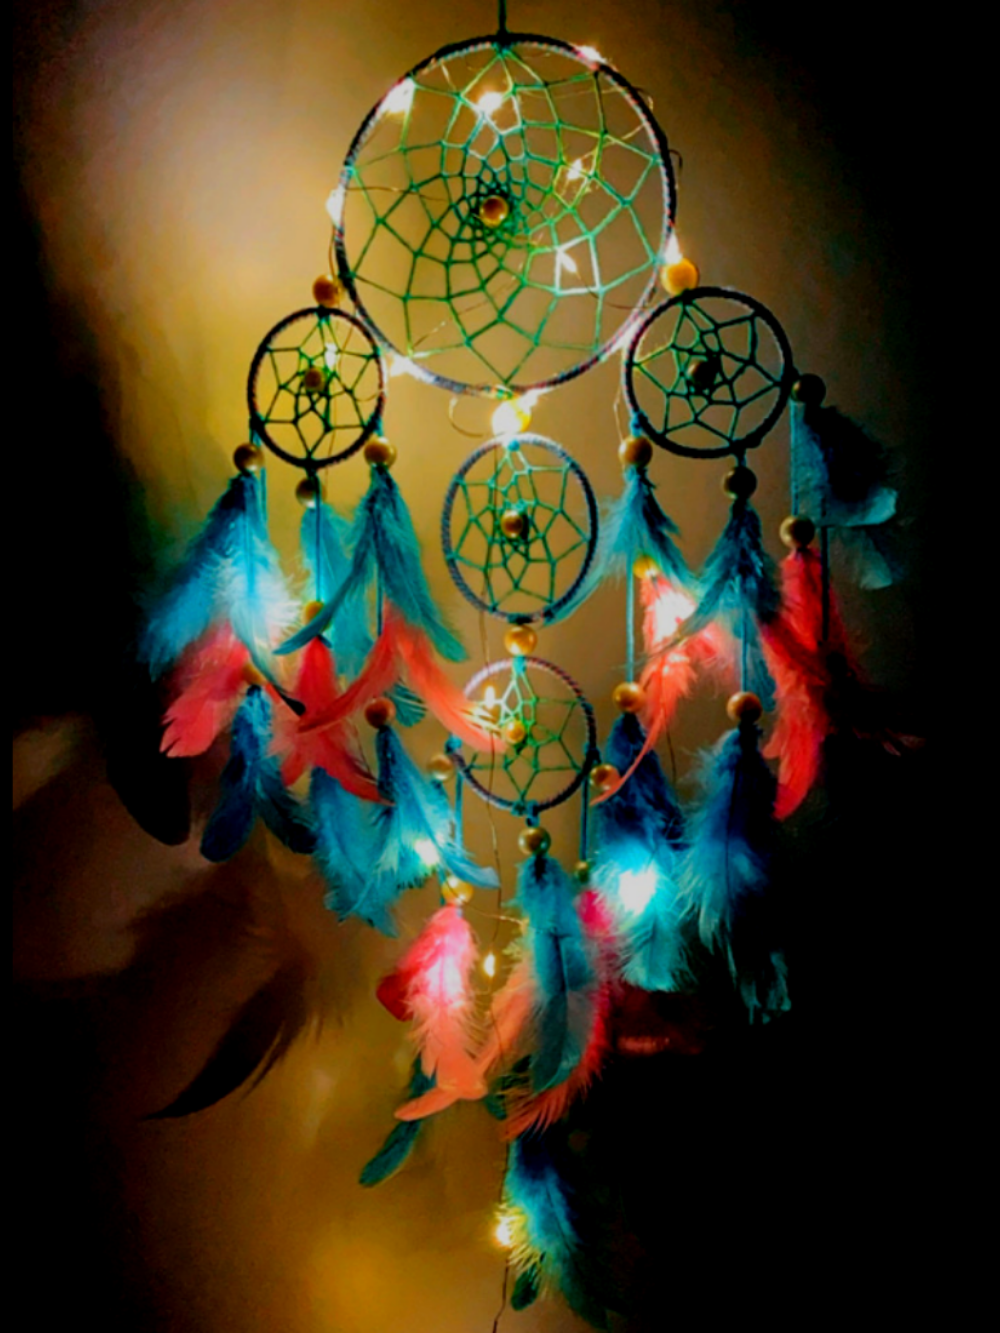 Large Pastel 4 Tier Dream Catcher with Pretty Lights